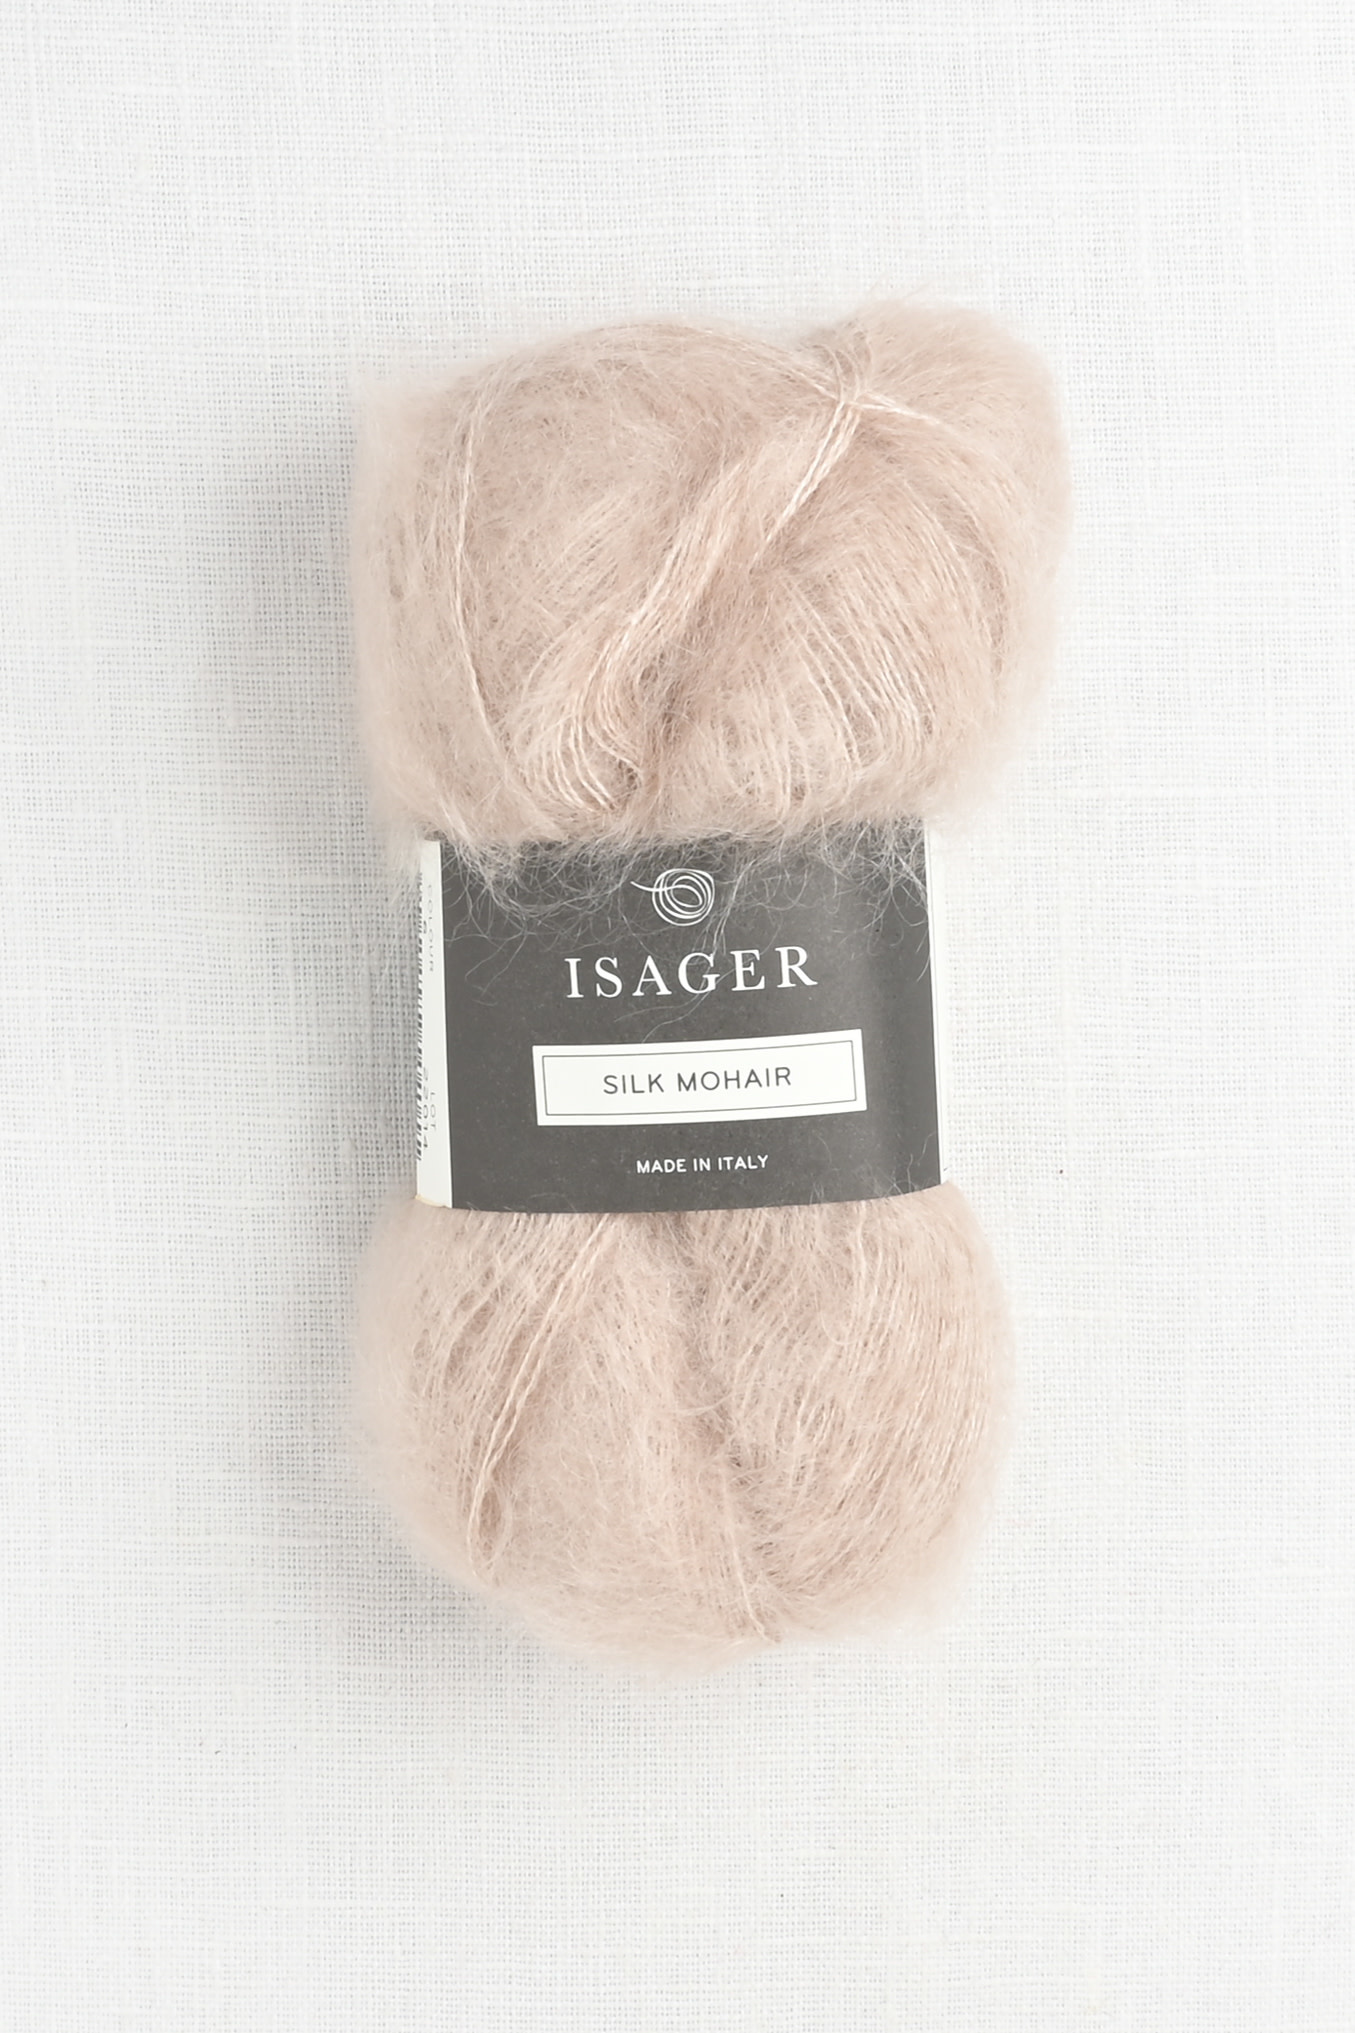 Isager Silk Mohair 6 - Wool and Company Fine Yarn